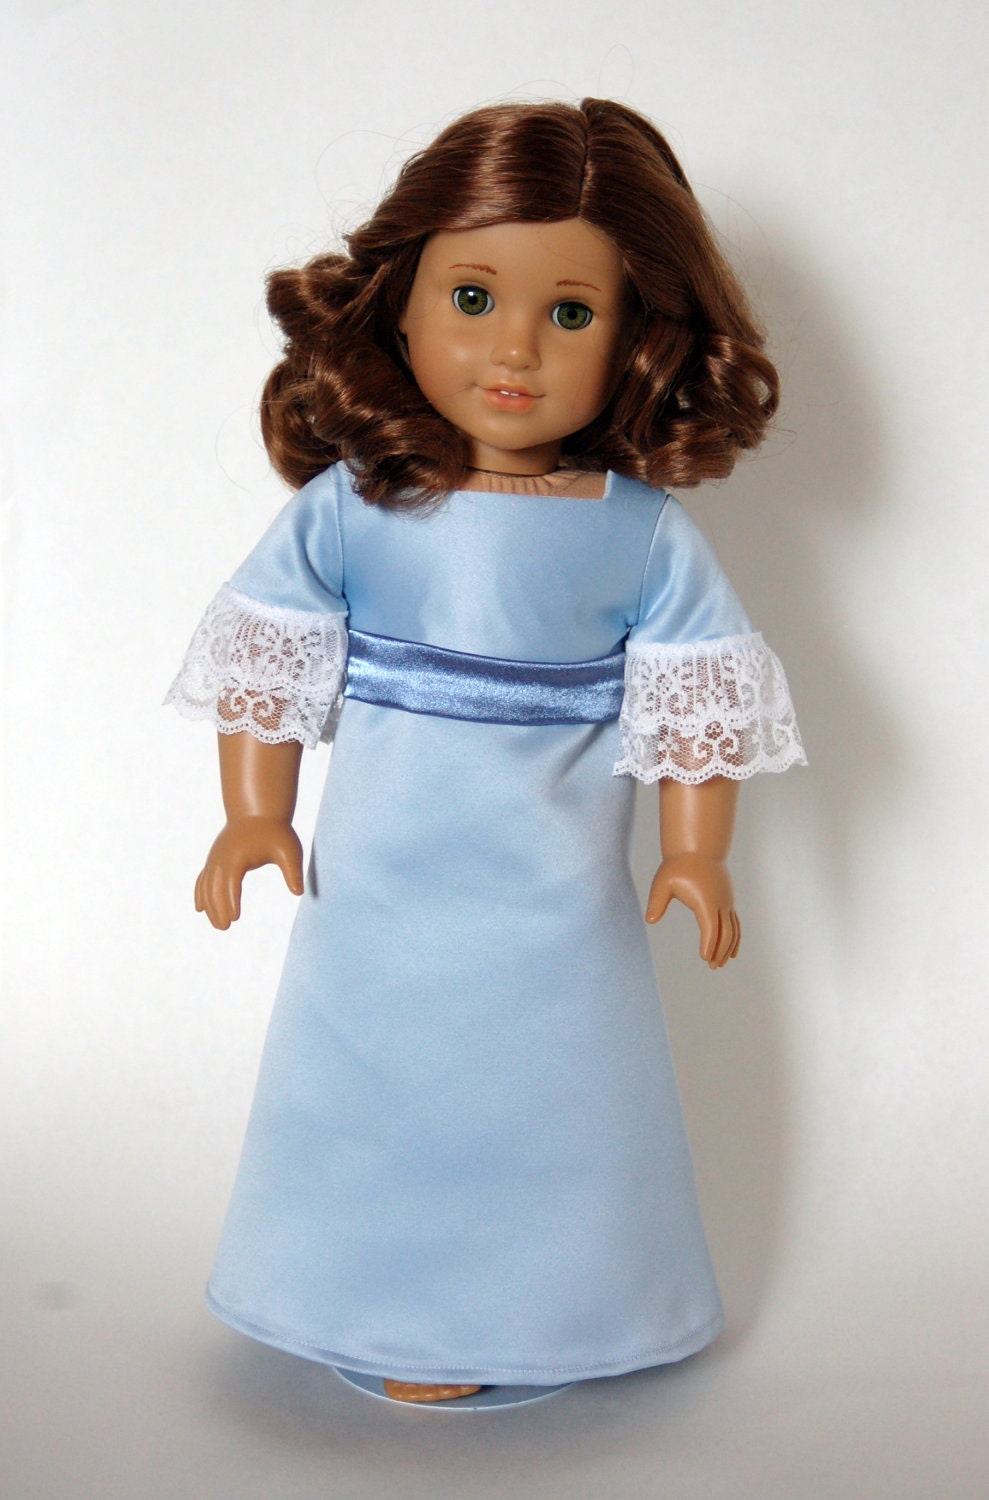 1910's Titanic Era American Girl Doll Dress - Baby Blue and Periwinkle